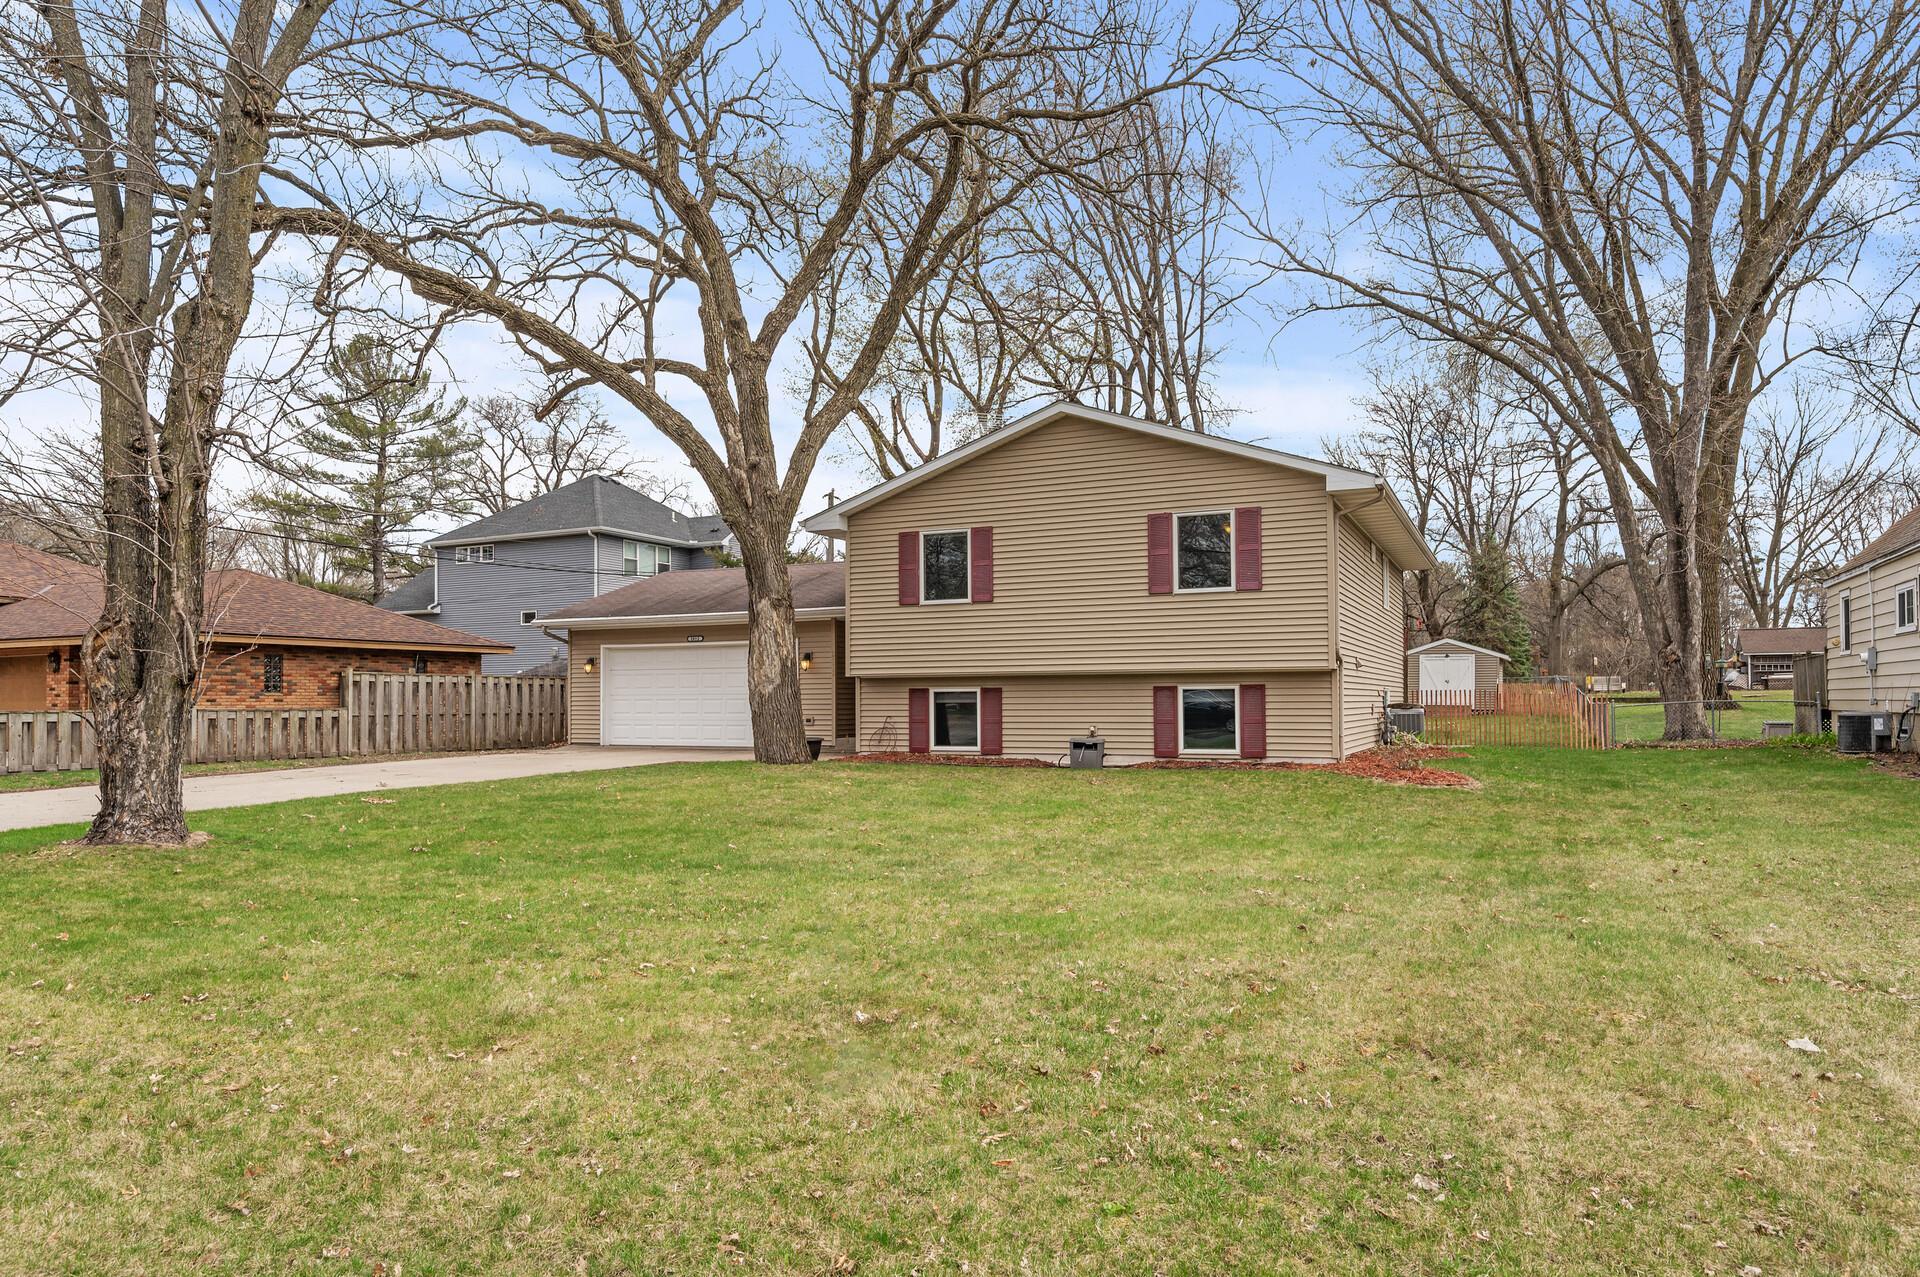 Welcome to 2812 Sherwood Road in Mounds View!